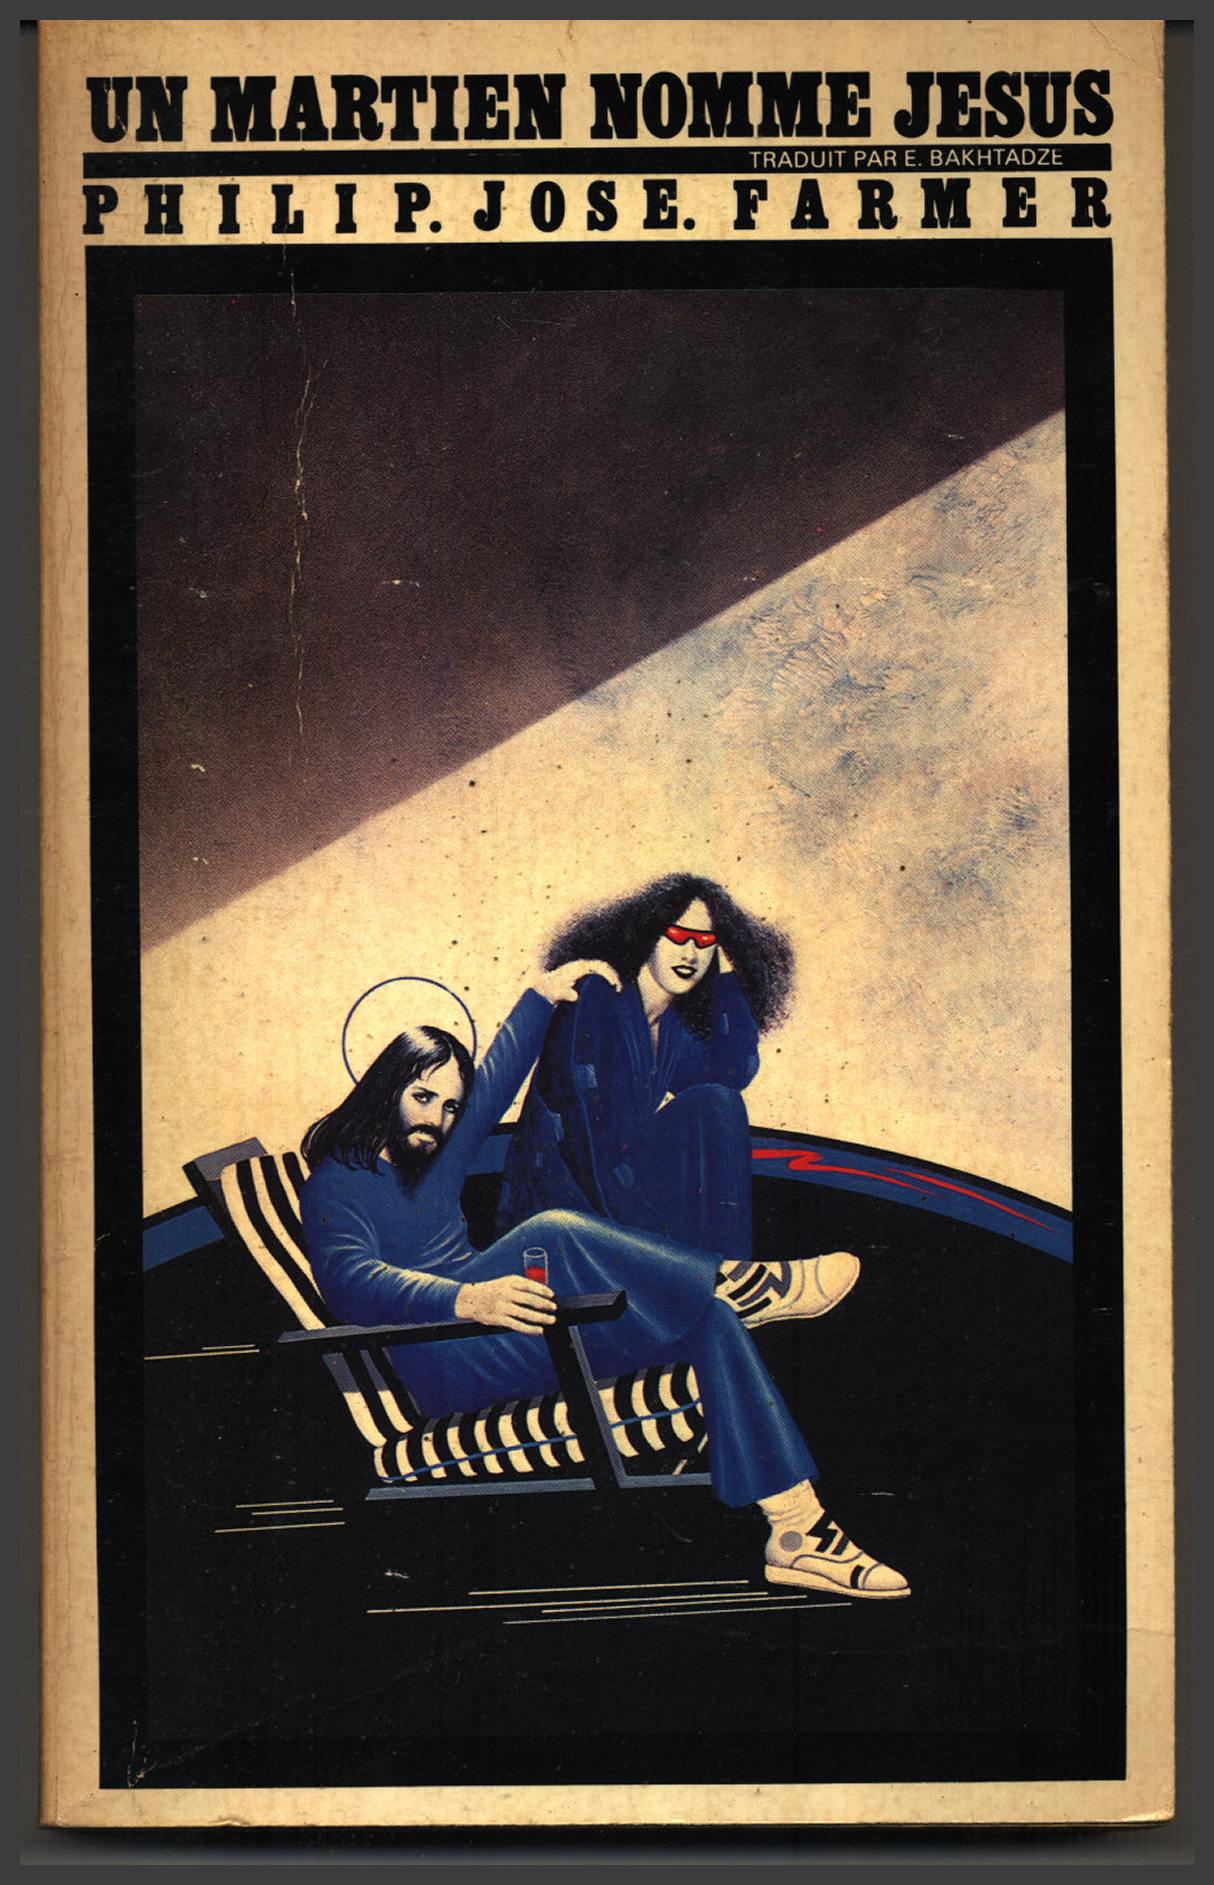 Jesus and Mary Magdalene, kickin' back in happier times